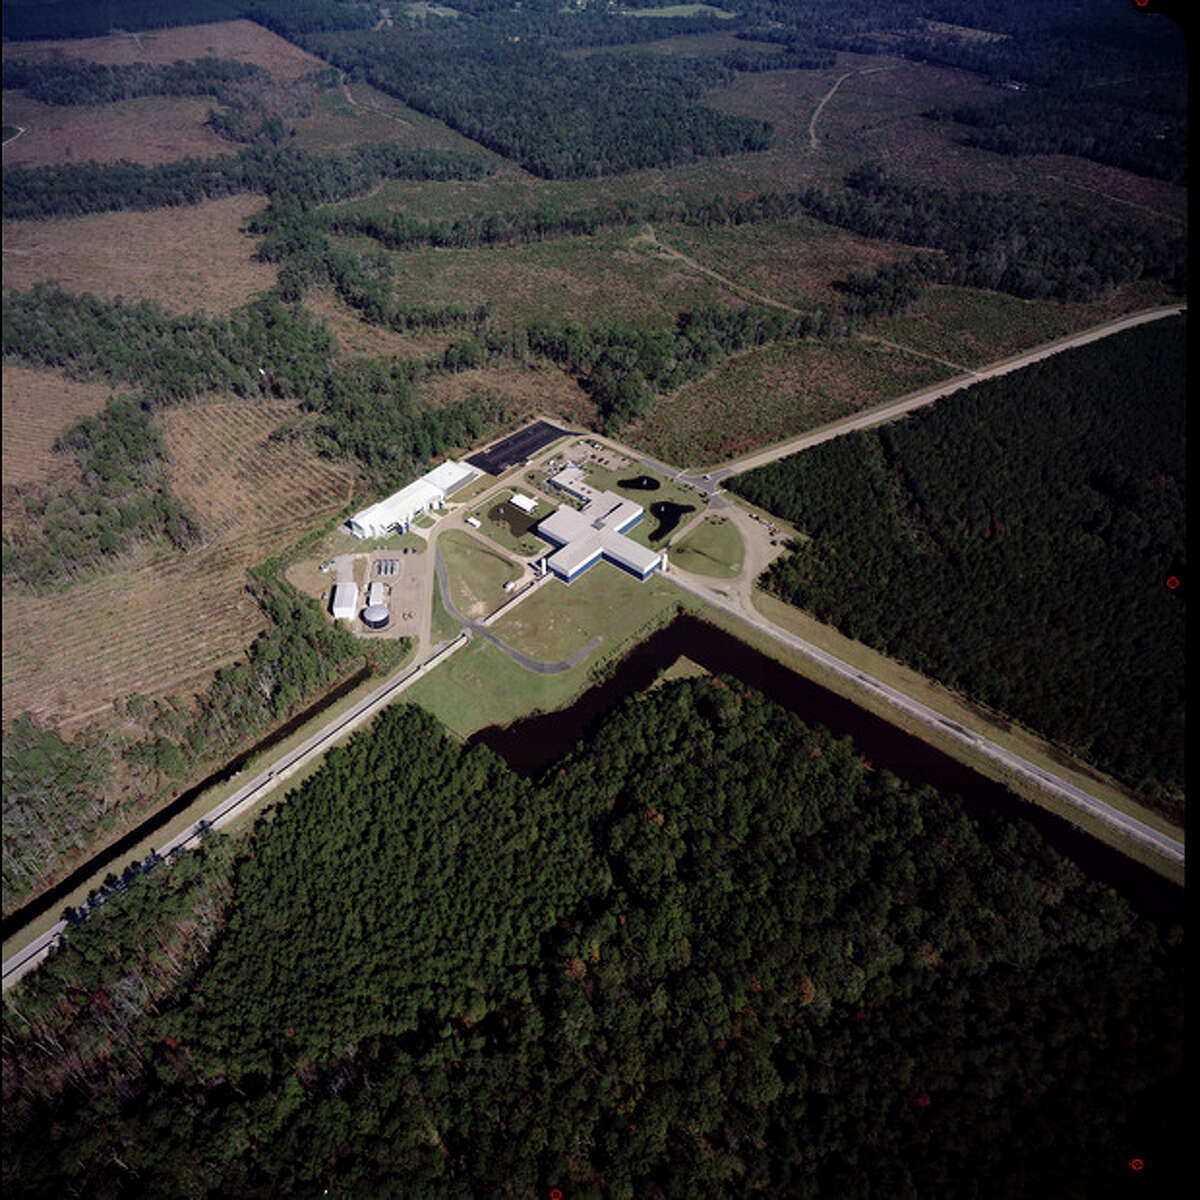 An undated handout photo shows an L-shaped antenna lab, known as LIGO, in Livingston, La. The antenna is one of two of its kind that detected on Sept. 14, 2015, what scientists say was the faint chirp of two black holes colliding a billion light-years away, fulfilling Einsteinâs general theory of relativity. (Caltech-M.I.T.-LIGO Lab via The New York Times) -- NO SALES; FOR EDITORIAL USE ONLY WITH SPACE WAVES DETECTION BY DENNIS OVERBYE FOR FEB. 11, 2016. ALL OTHER USE PROHIBITED. --